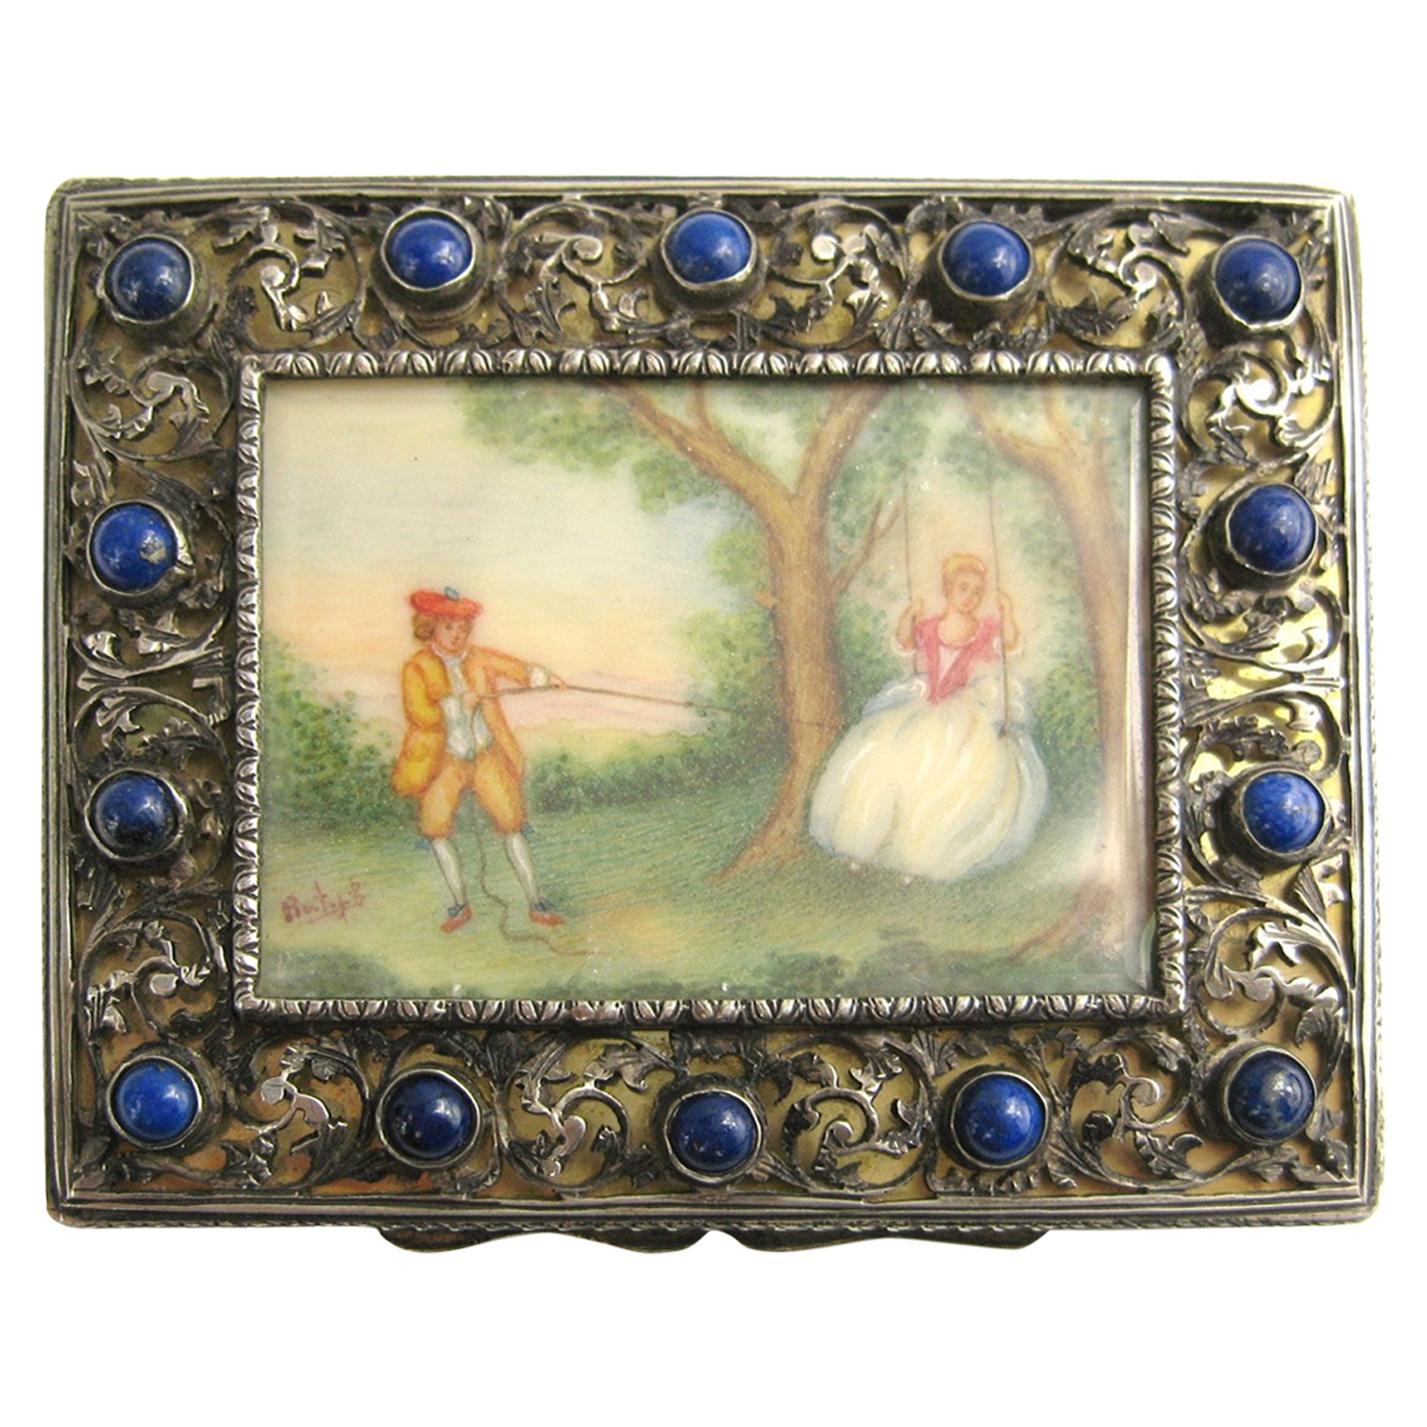  silver compact with Lapis Lazuli, Hand painted miniature scene